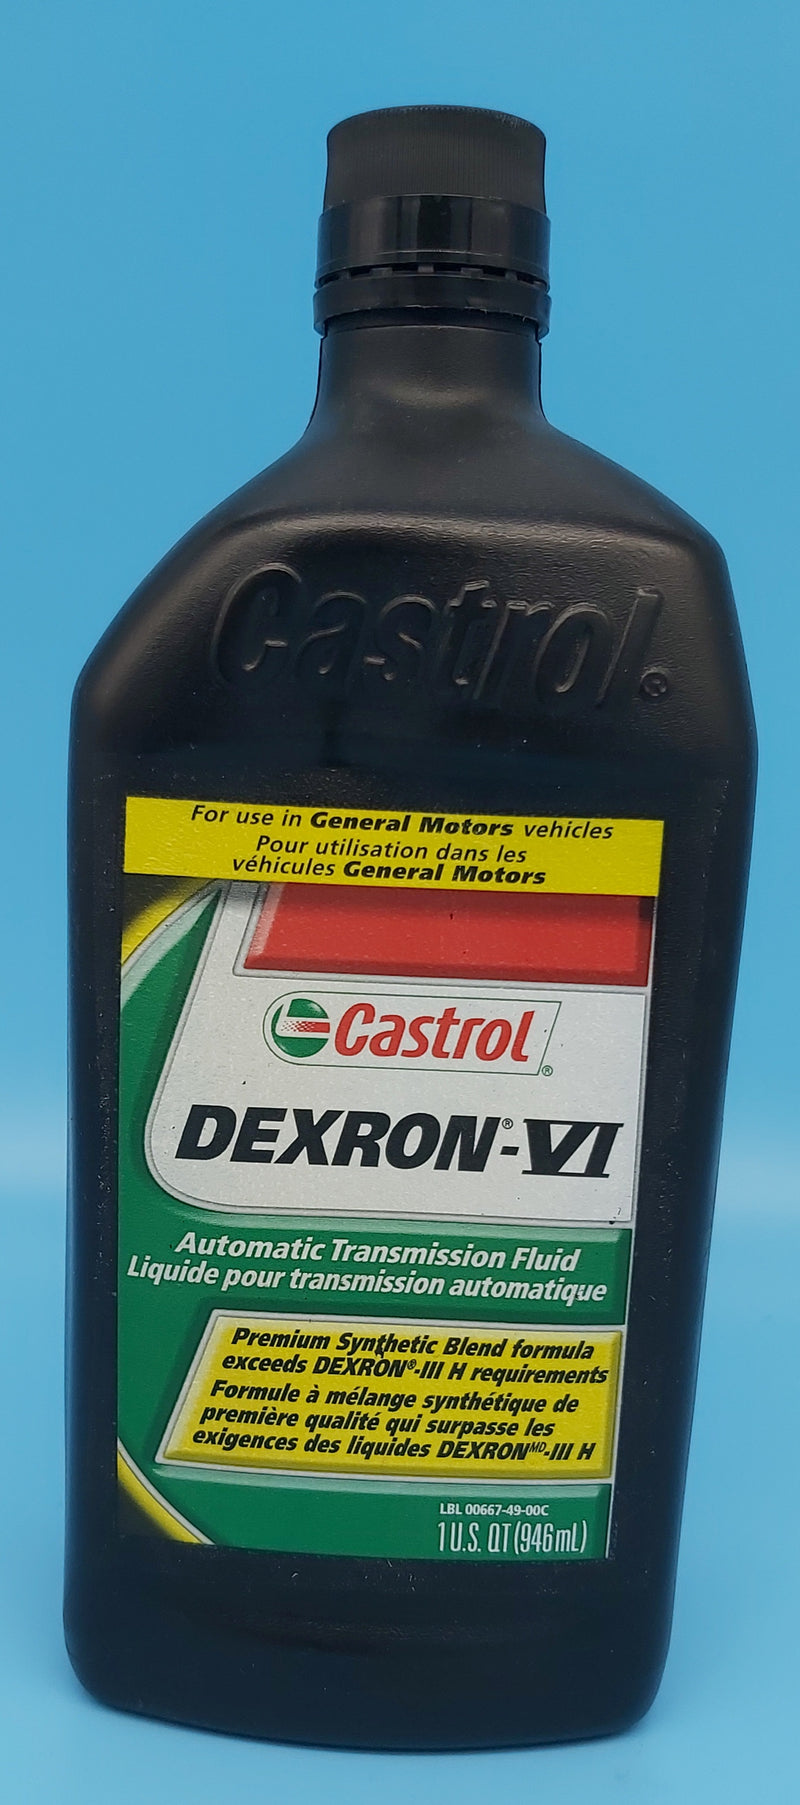 Castrol Dexron VI Automatic Transmission Fluid. We use this in our Borg Warner inboard transmissions.